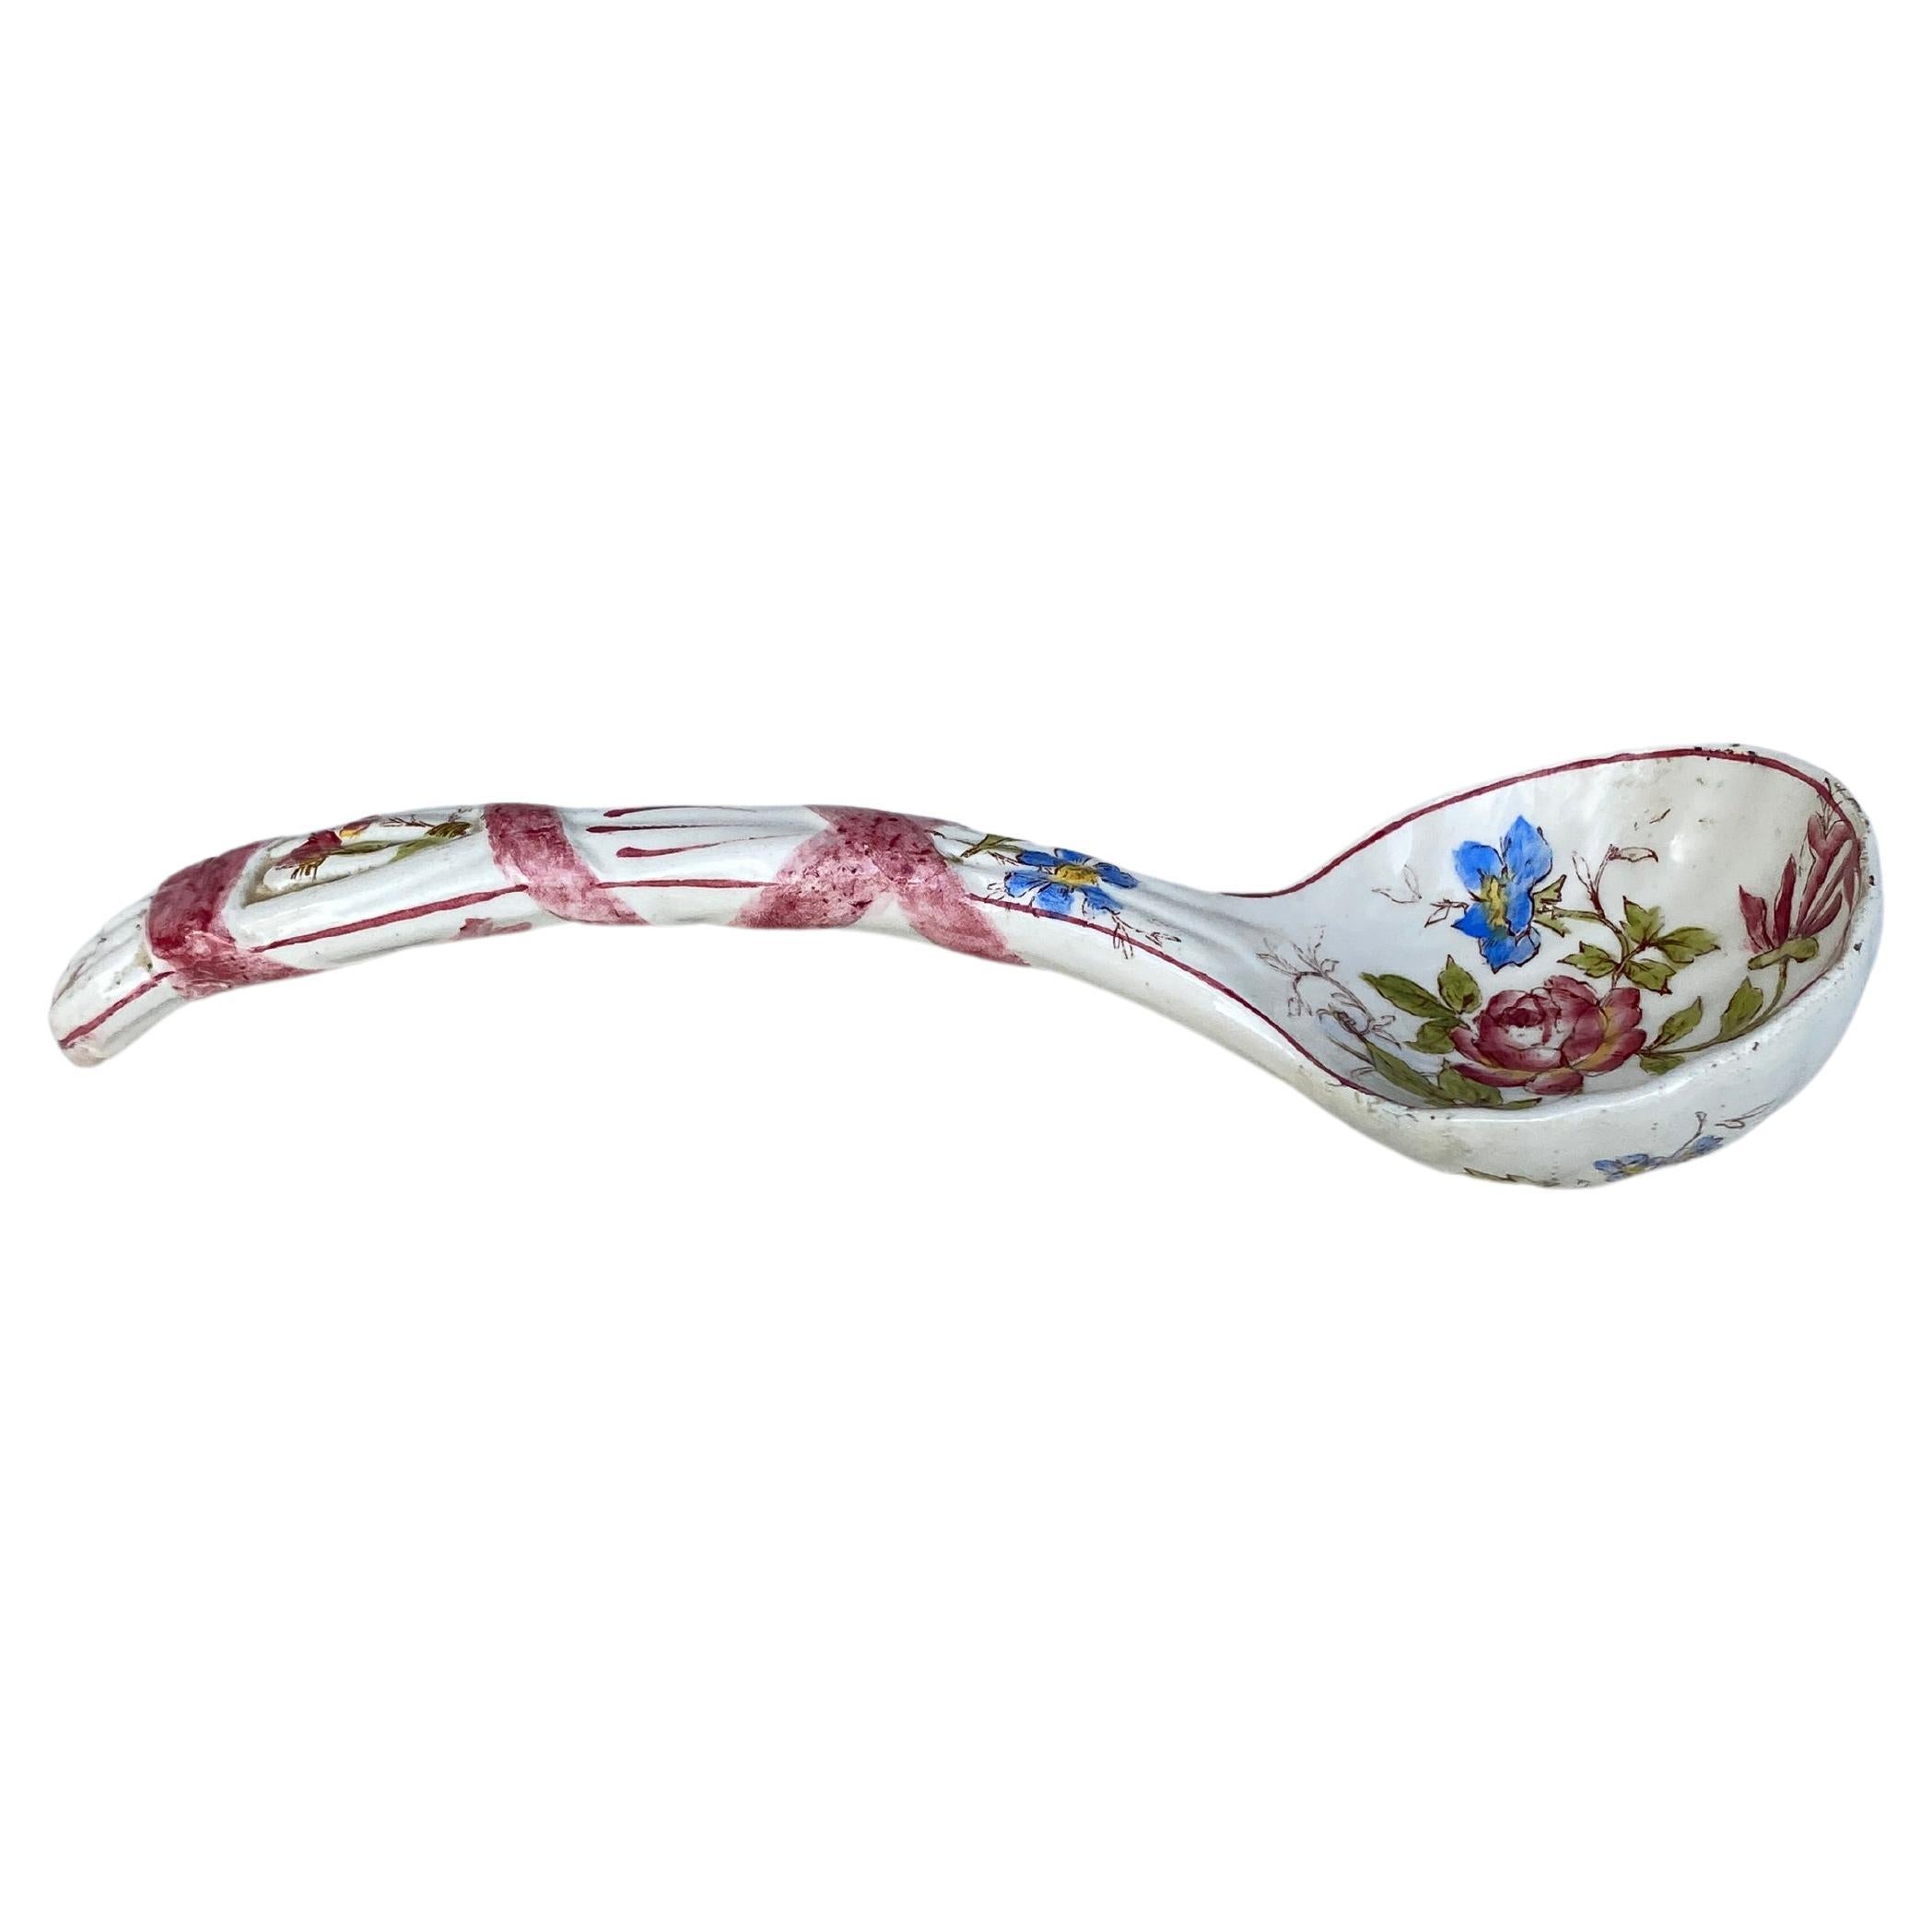 French Provincial French Majolica Spoon Longchamp Circa 1890 For Sale